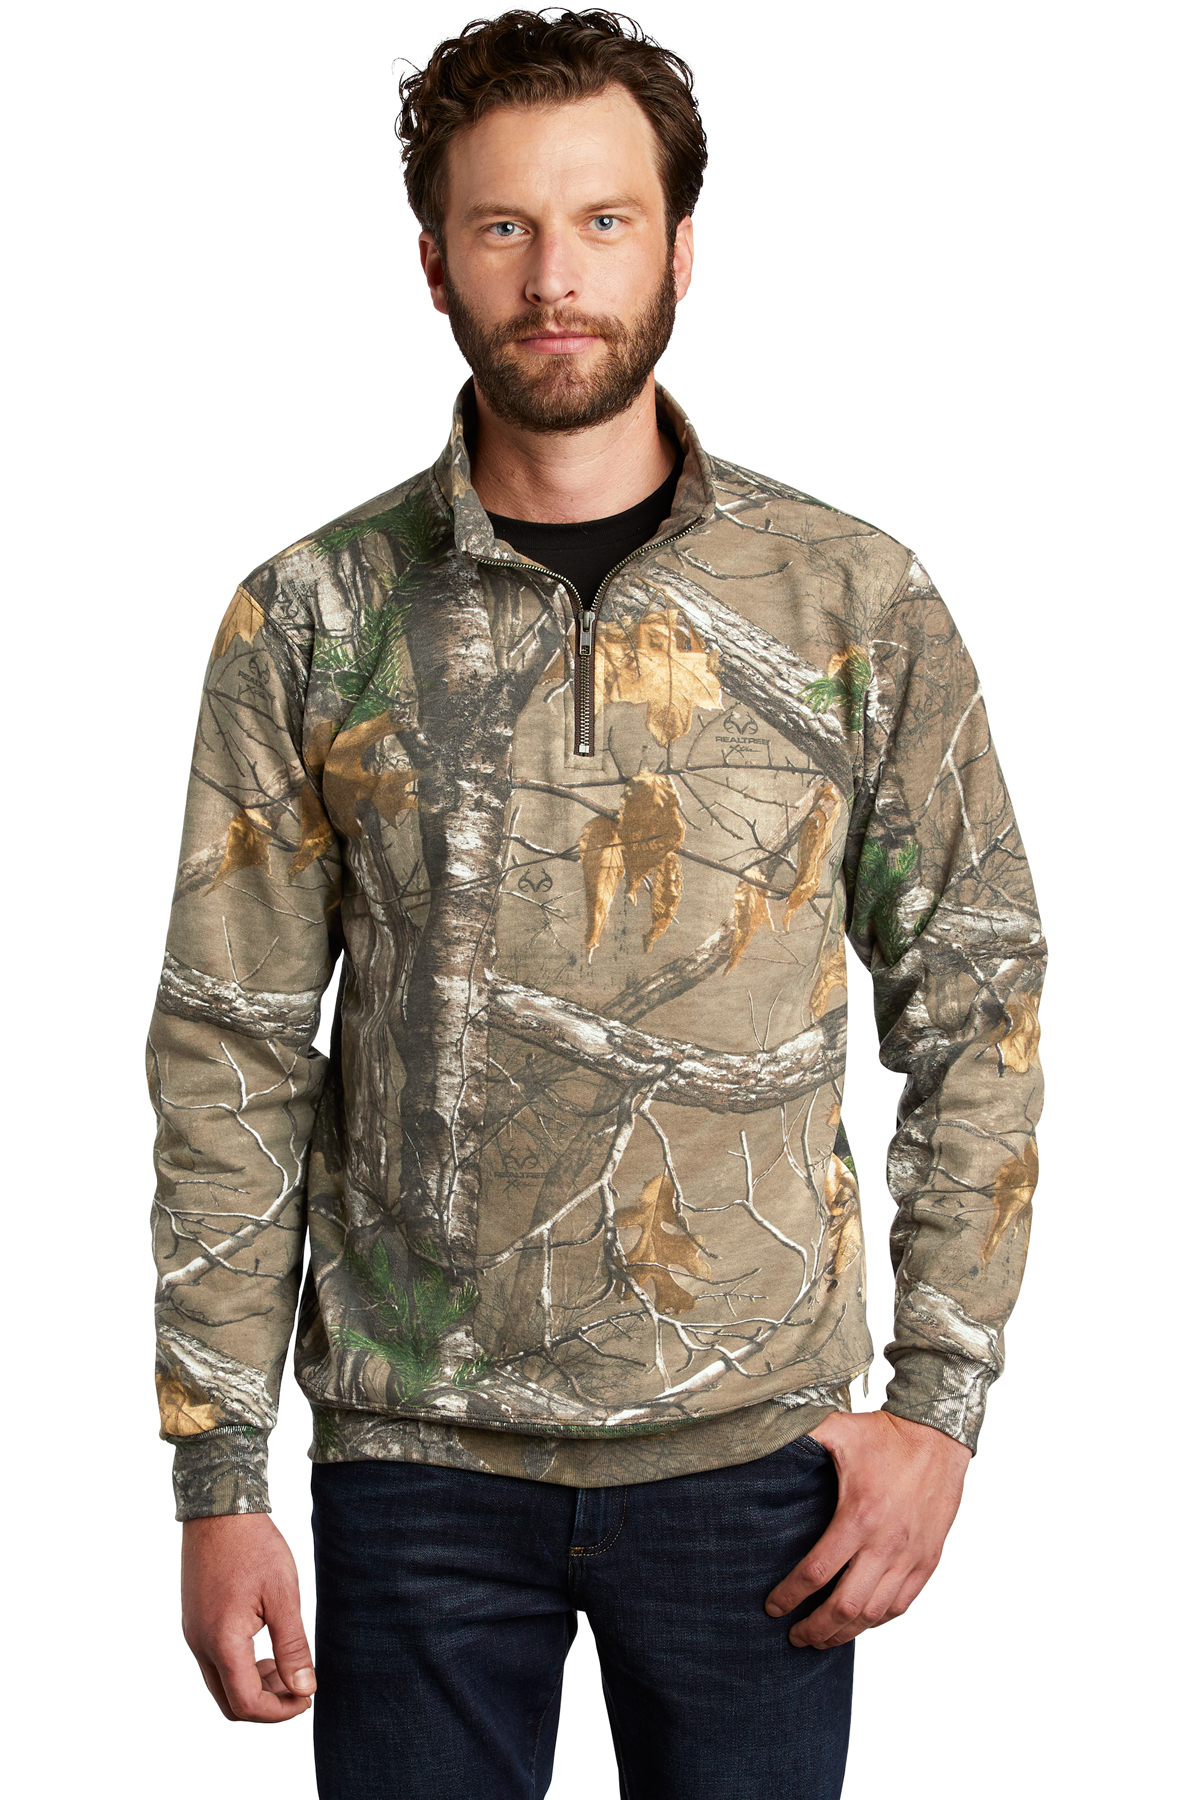 Russell Outdoors Mens S-3XL FULL or 1/4 ZIP Realtree XTRA Camo Sport Sweatshirts